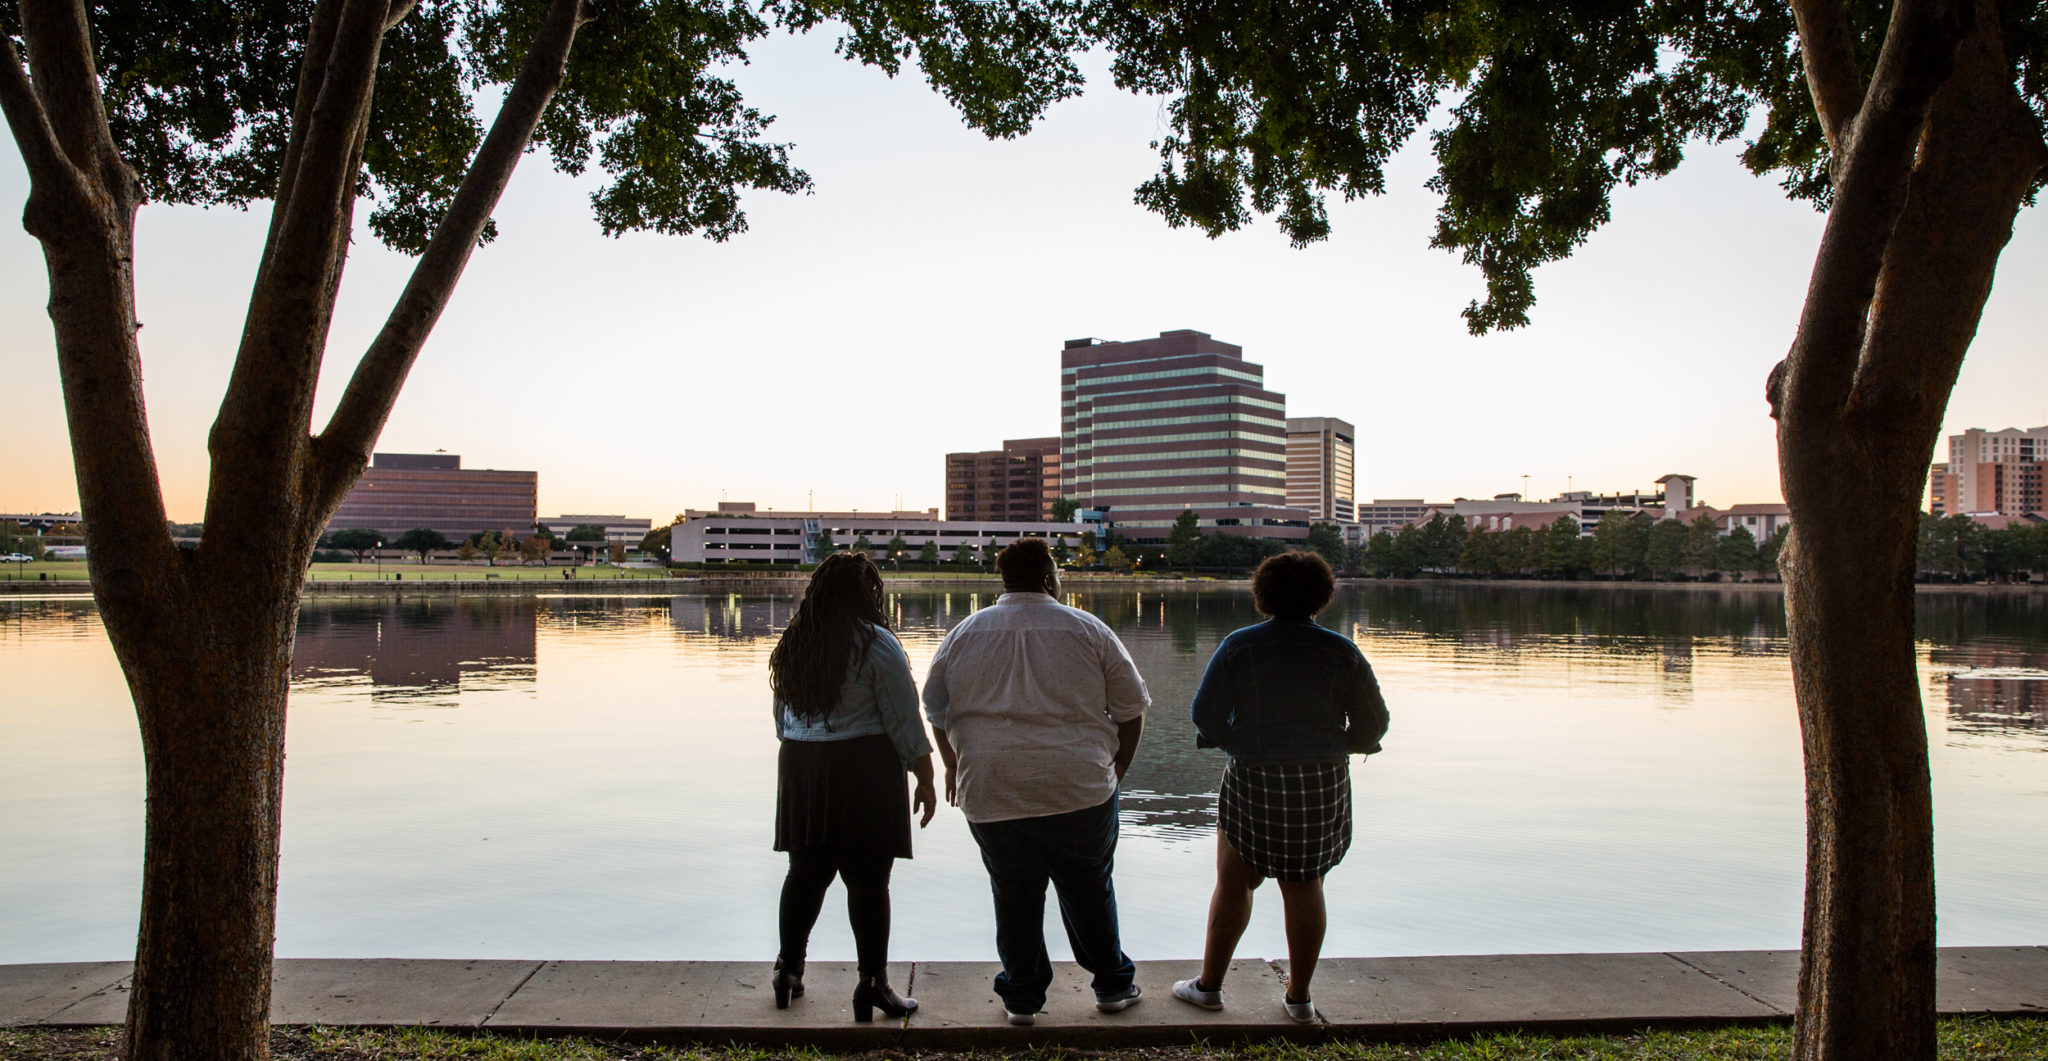 Nina, Corey, and Sherica stand in silhouette against a sunset view of the pond in front of their apartment.